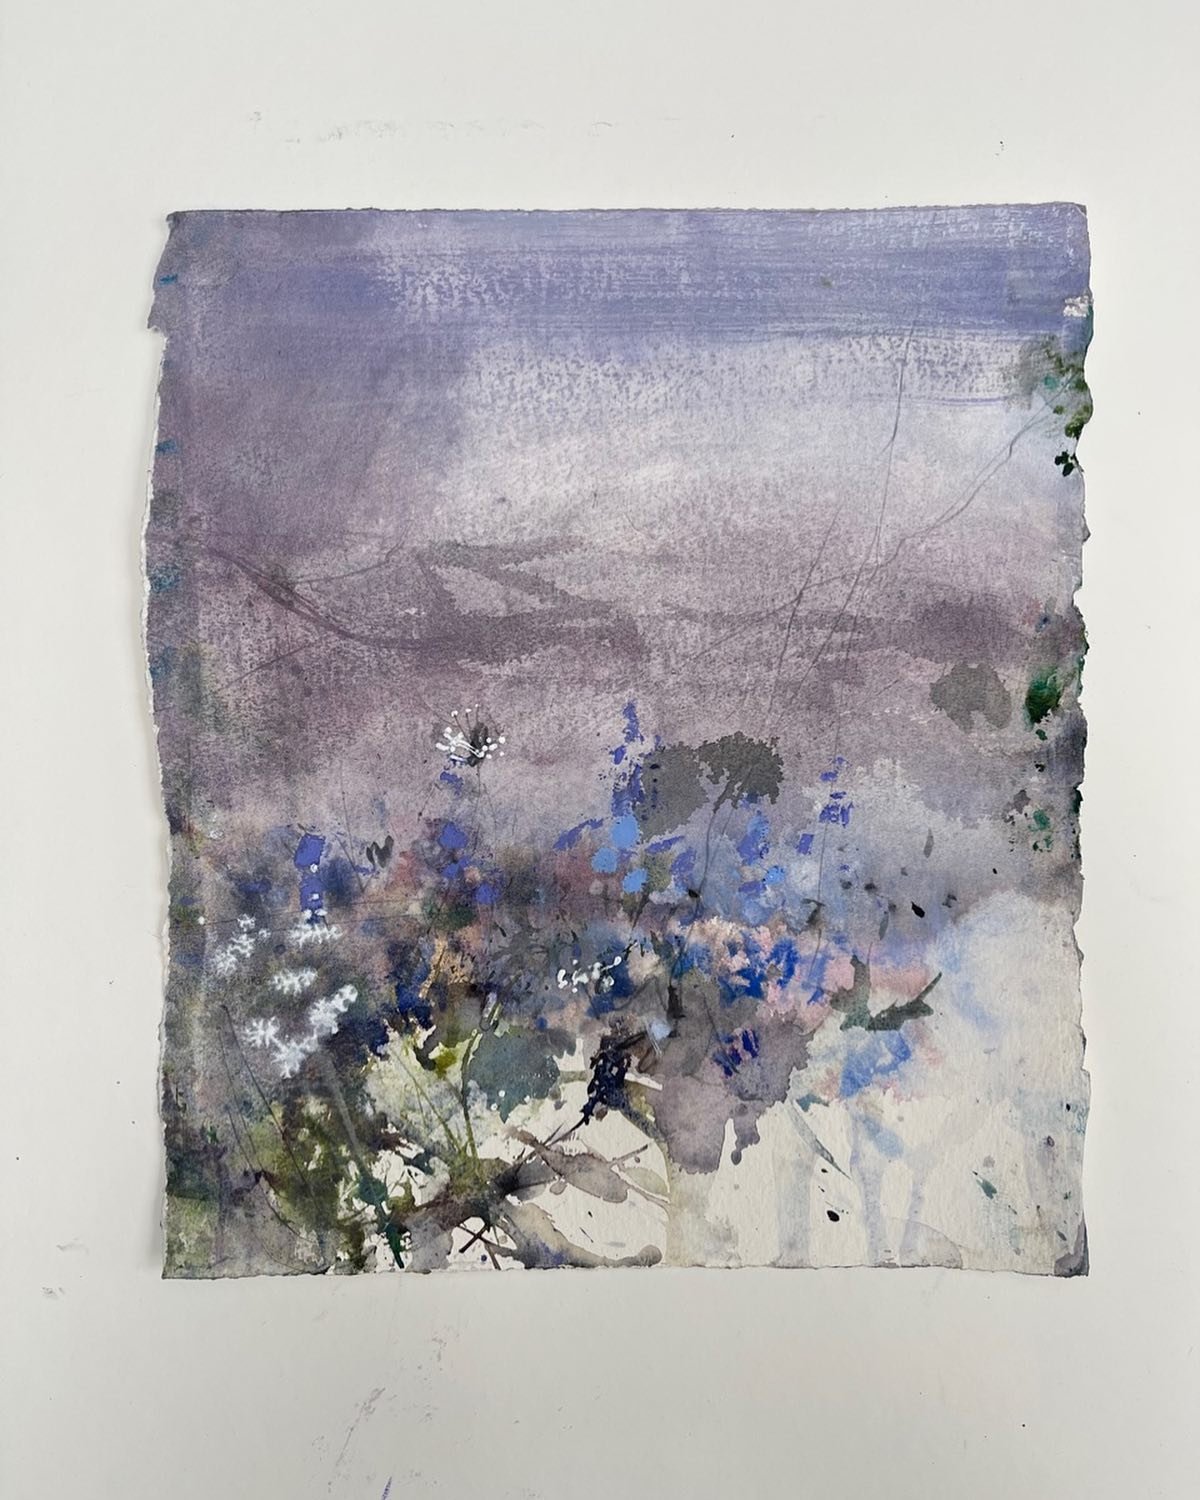 6th May.
Until I found the smallest tangible feeling&hellip;

#enpleinair #spring #hope #feeling #flowers #exhibition  #landscape #mixedmedia #watercolour #malerei #soloexhibition #inspiration #artcontemporary #womenpainters #painting #artist #art #p